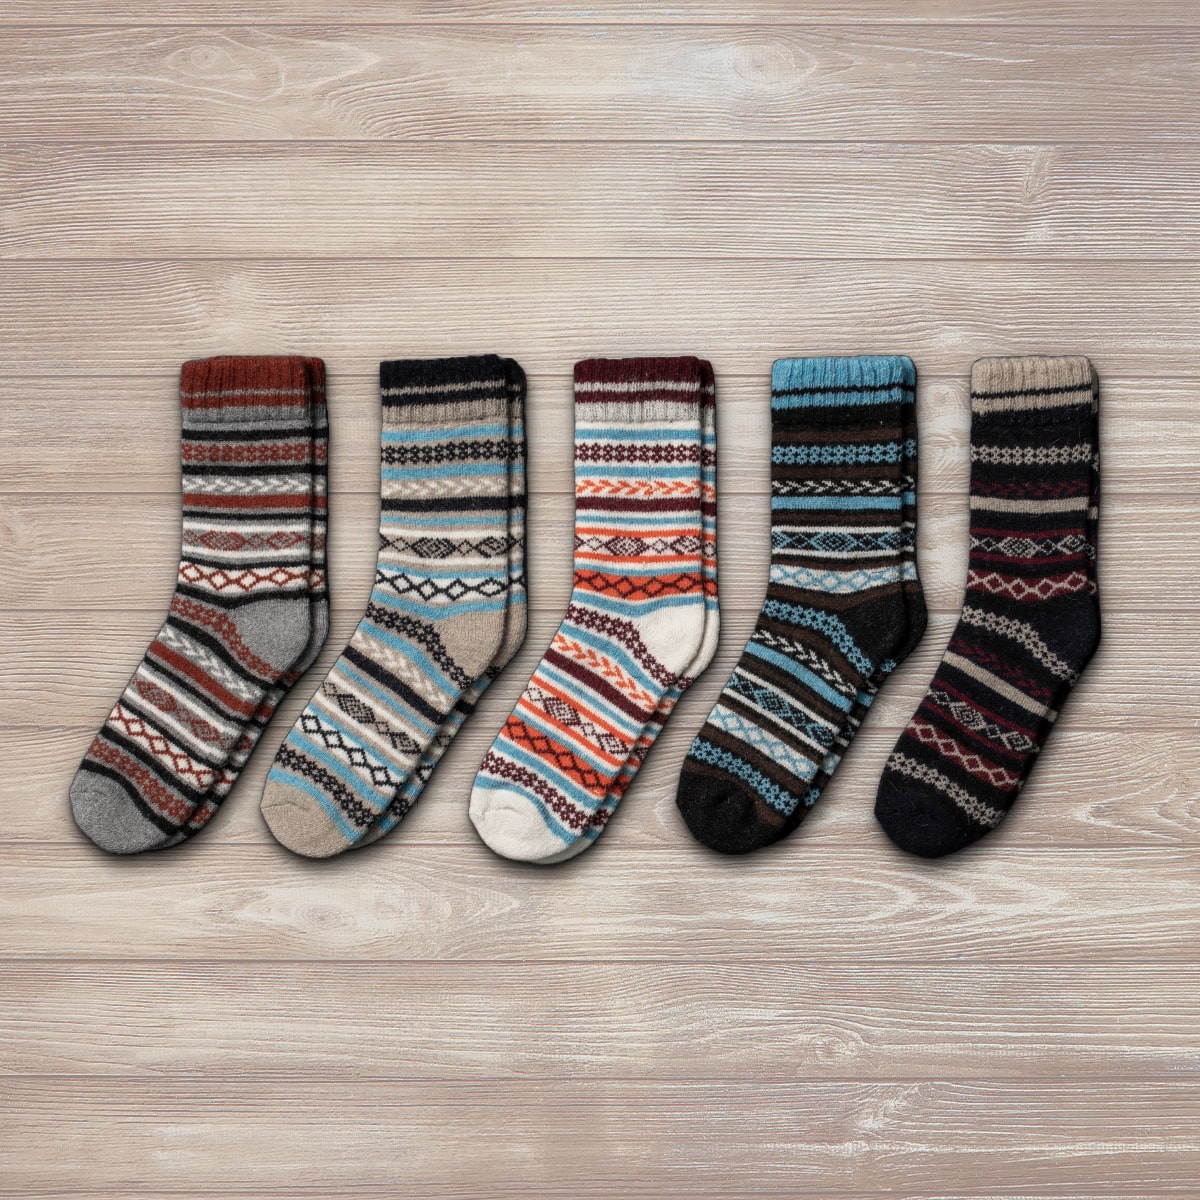 13 Best Sock Materials? I'll Tell You The Material Ratio for Different Socks